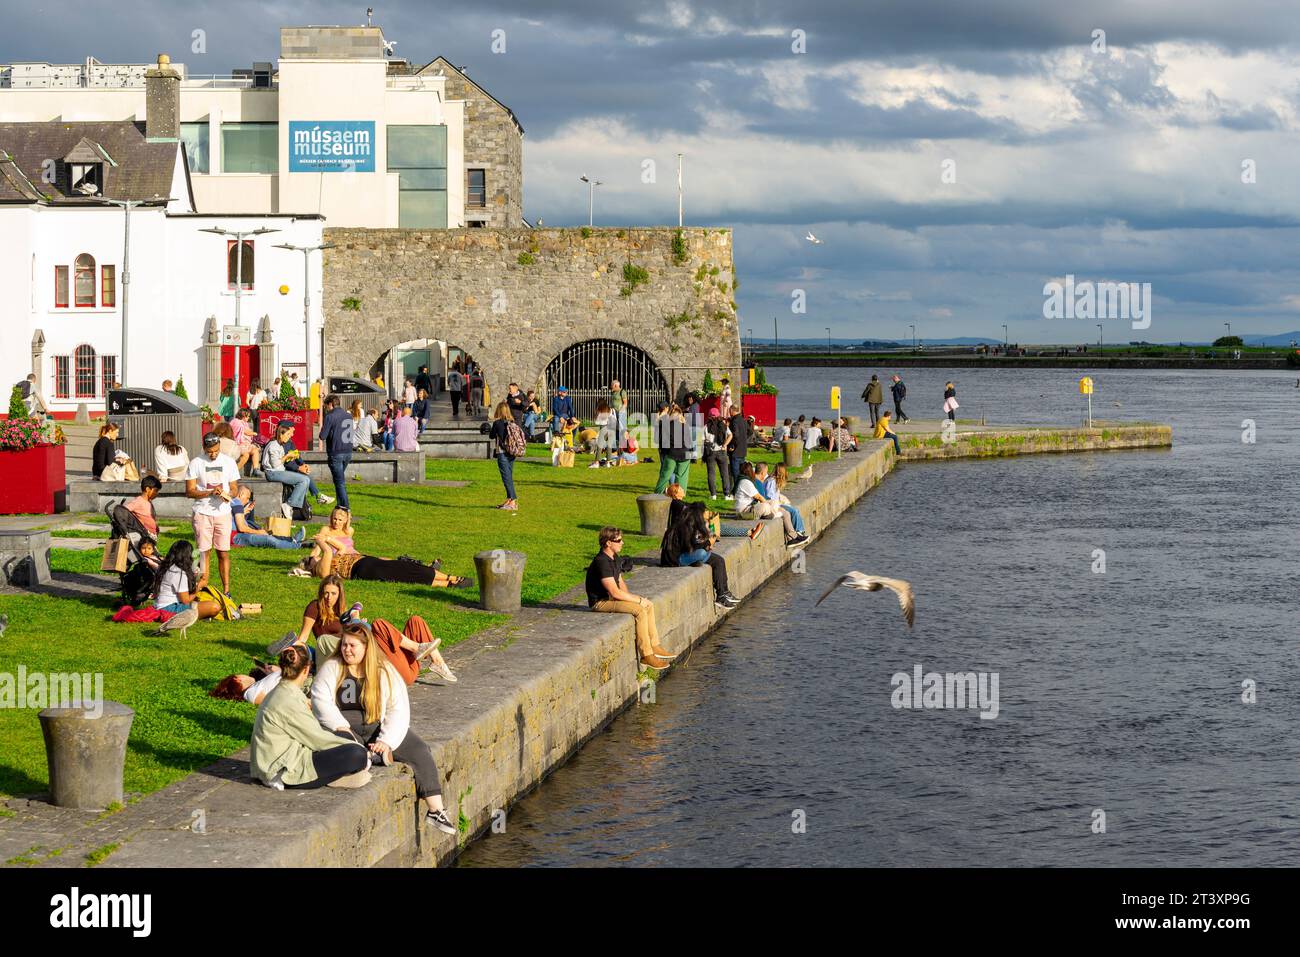 Galway City Museum and Spanish Arches, Galway, Irlande, Royaume-Uni. Banque D'Images